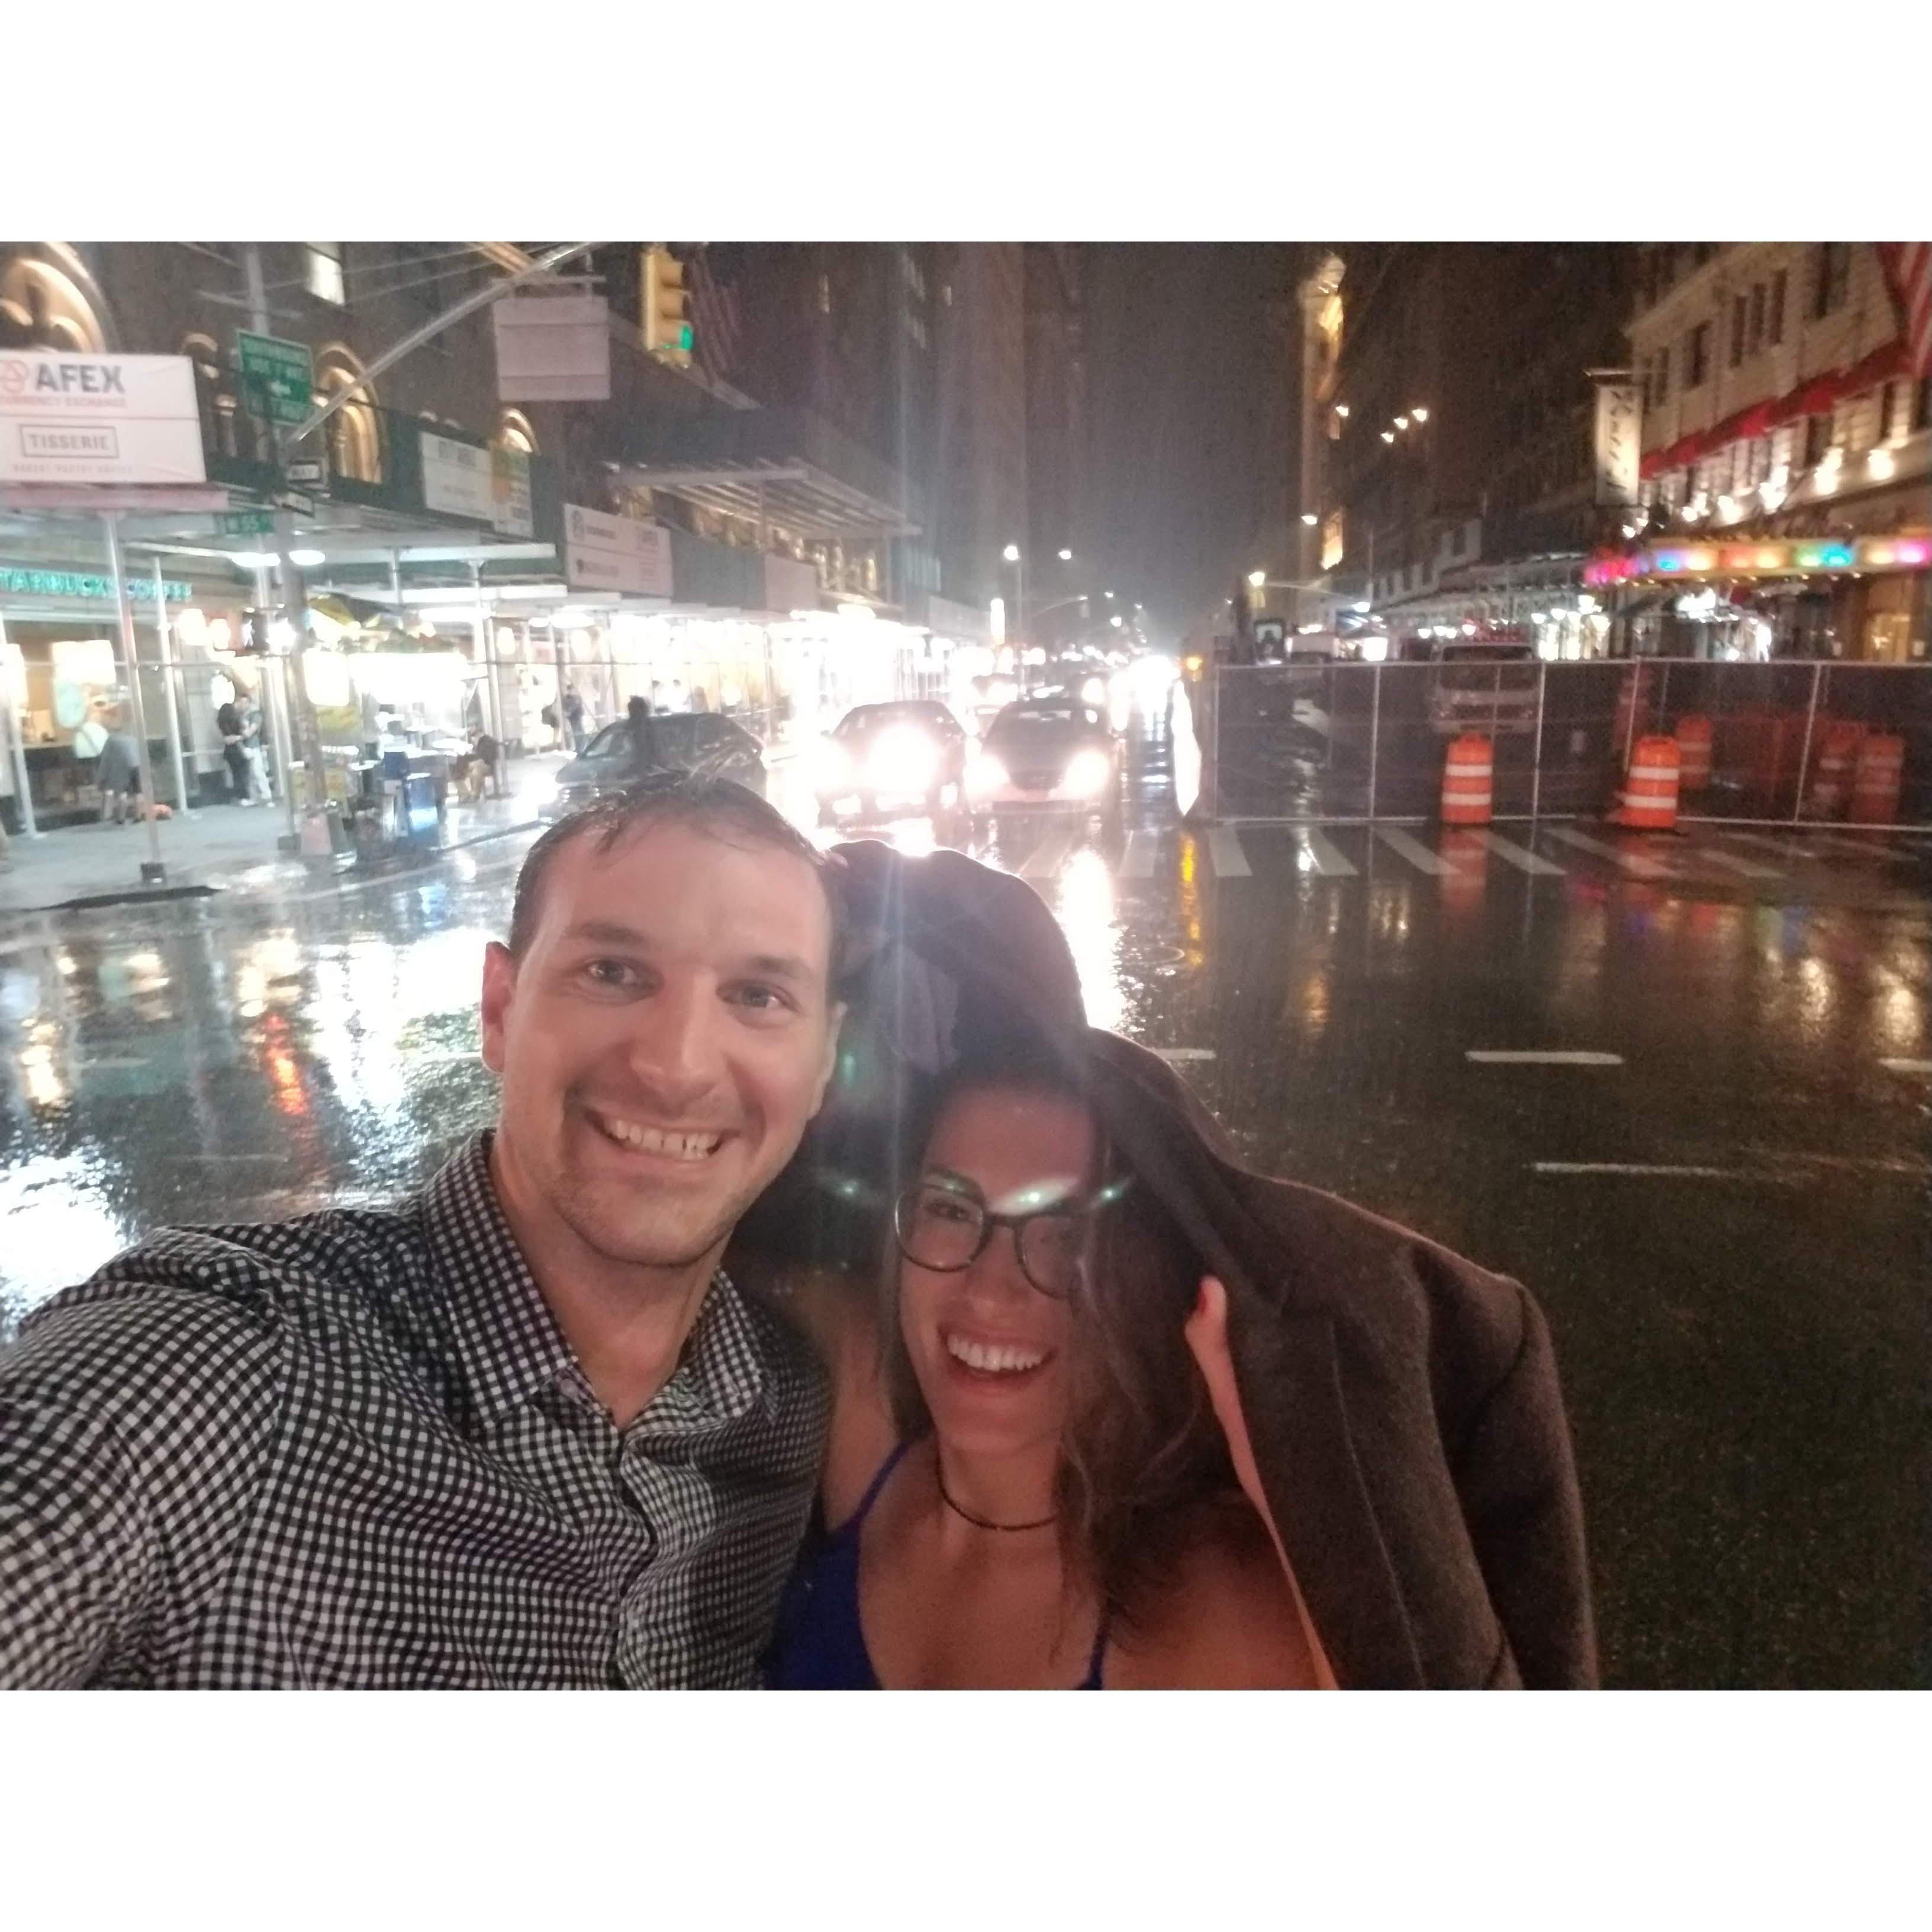 We found the rain again on our first night in NYC!